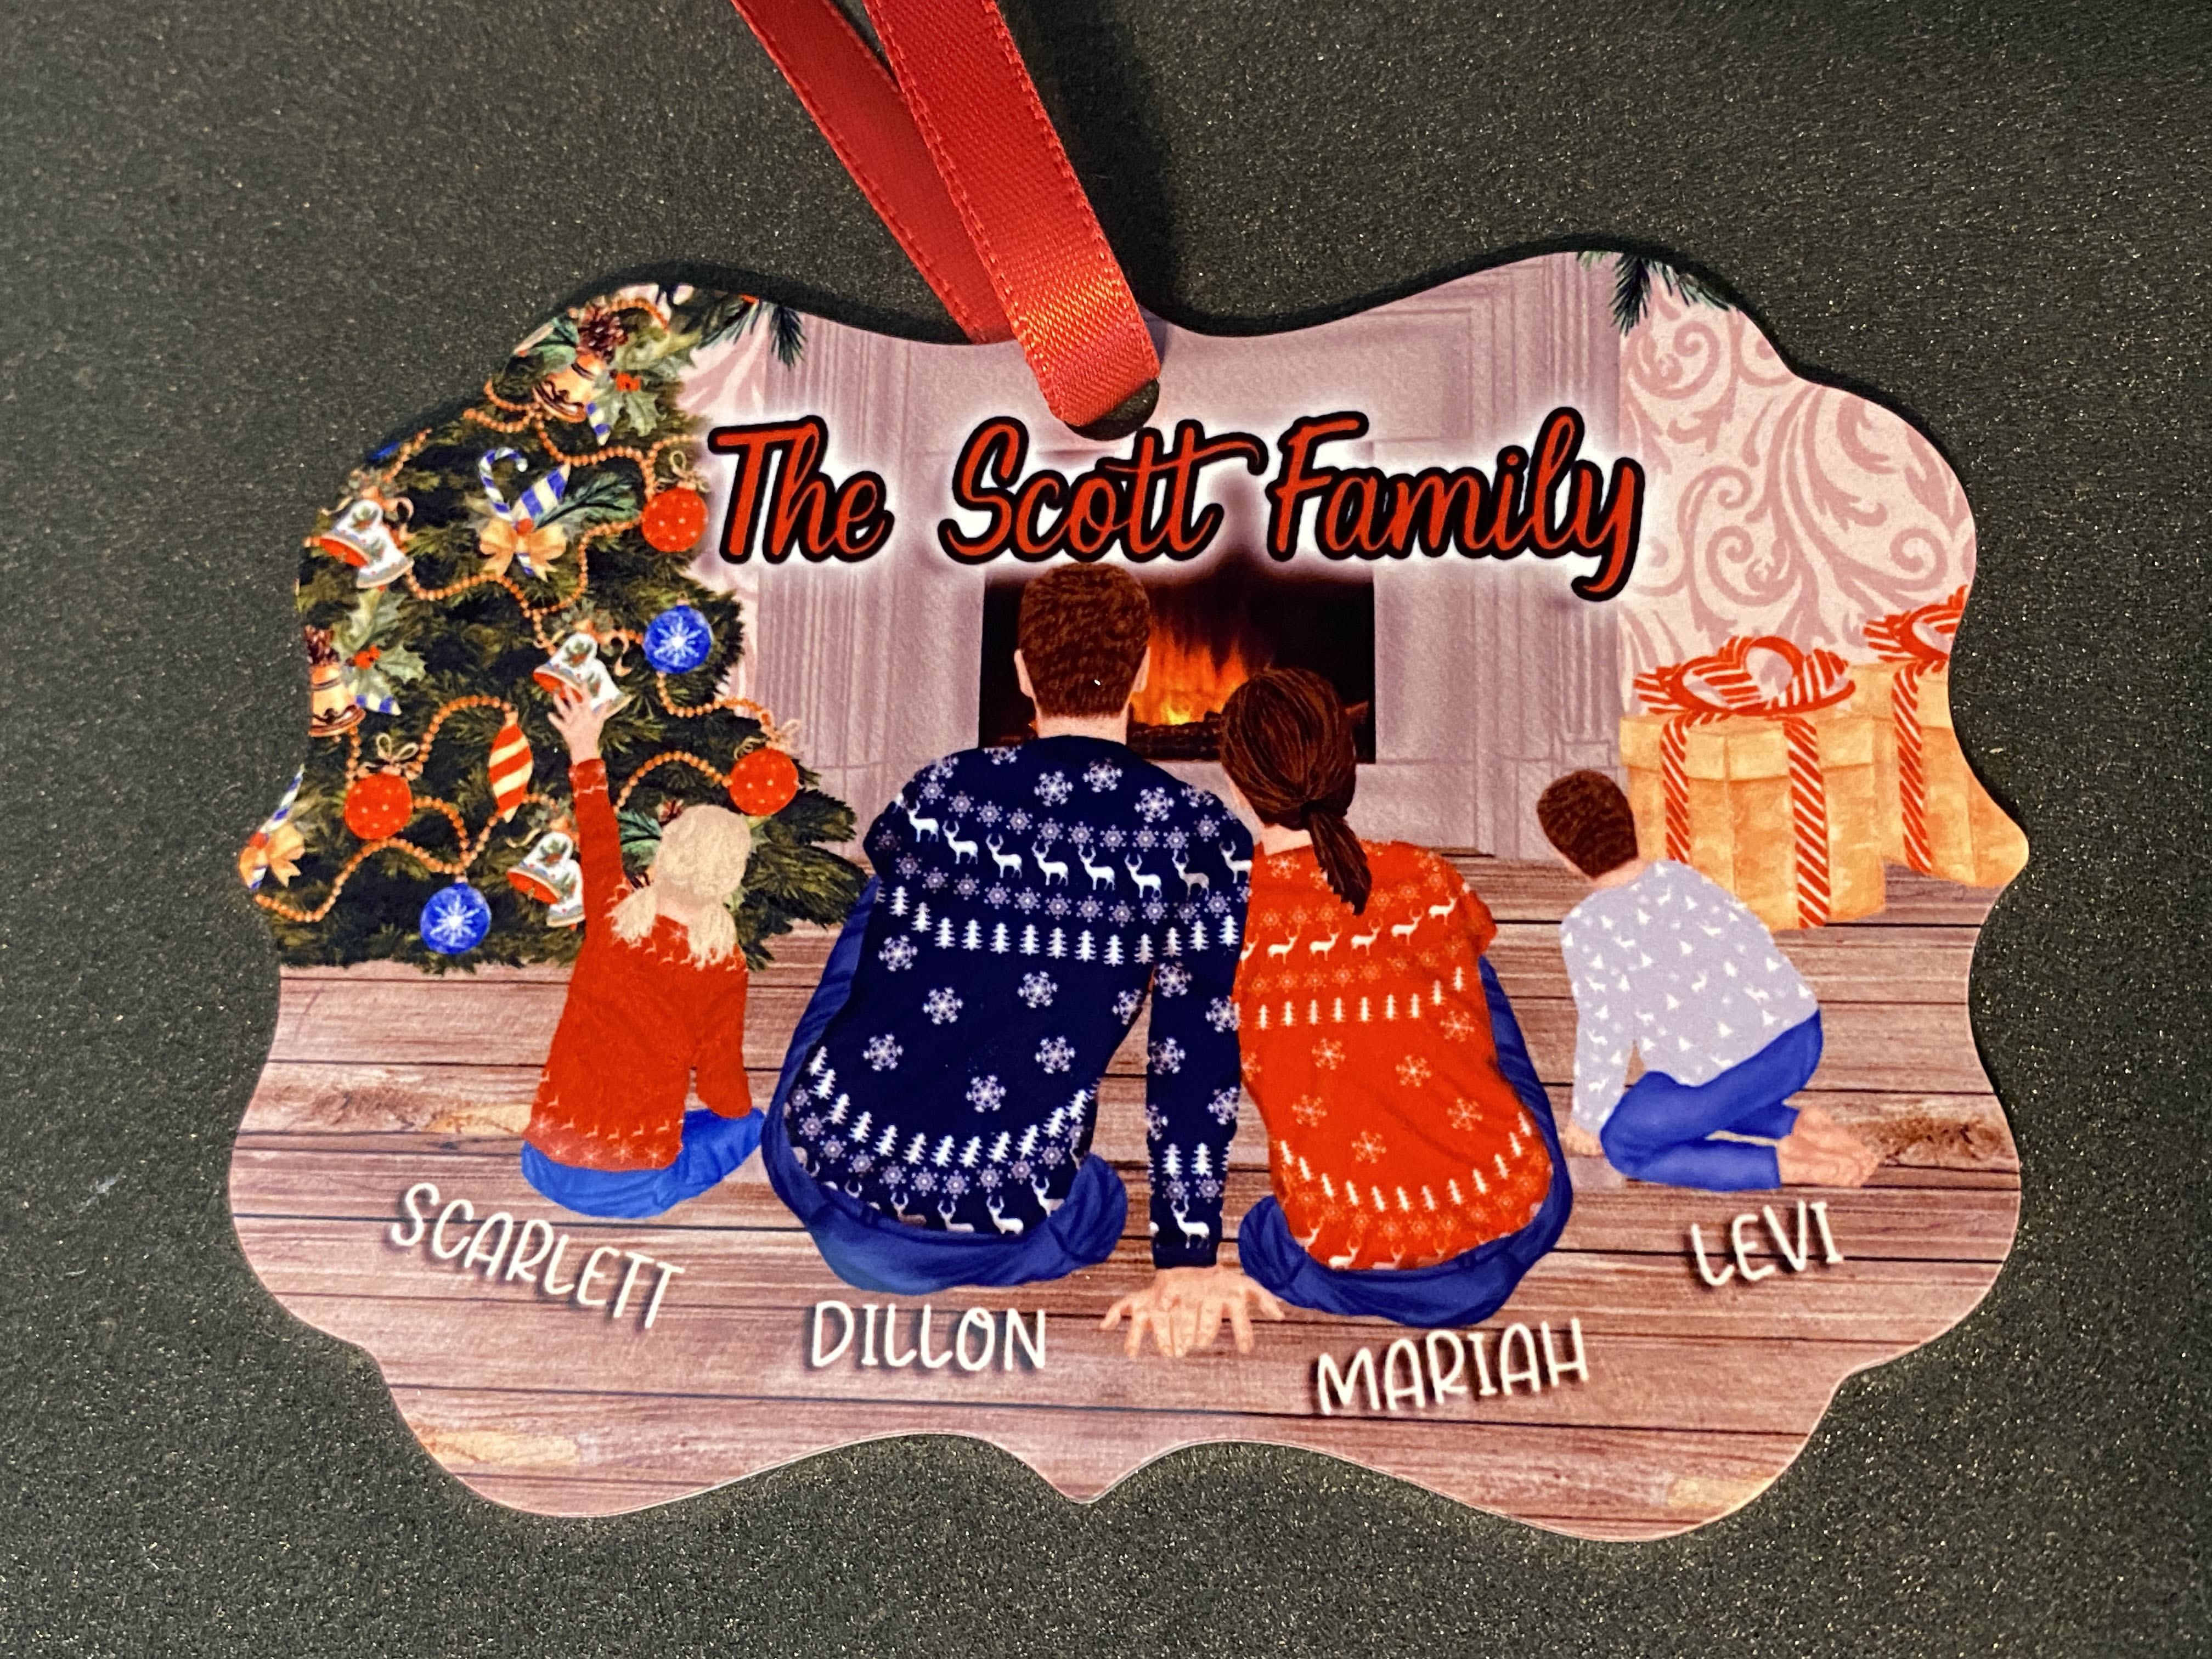 Using custom family images, I made a one of a kind Christmas ornament for a customer. It turned